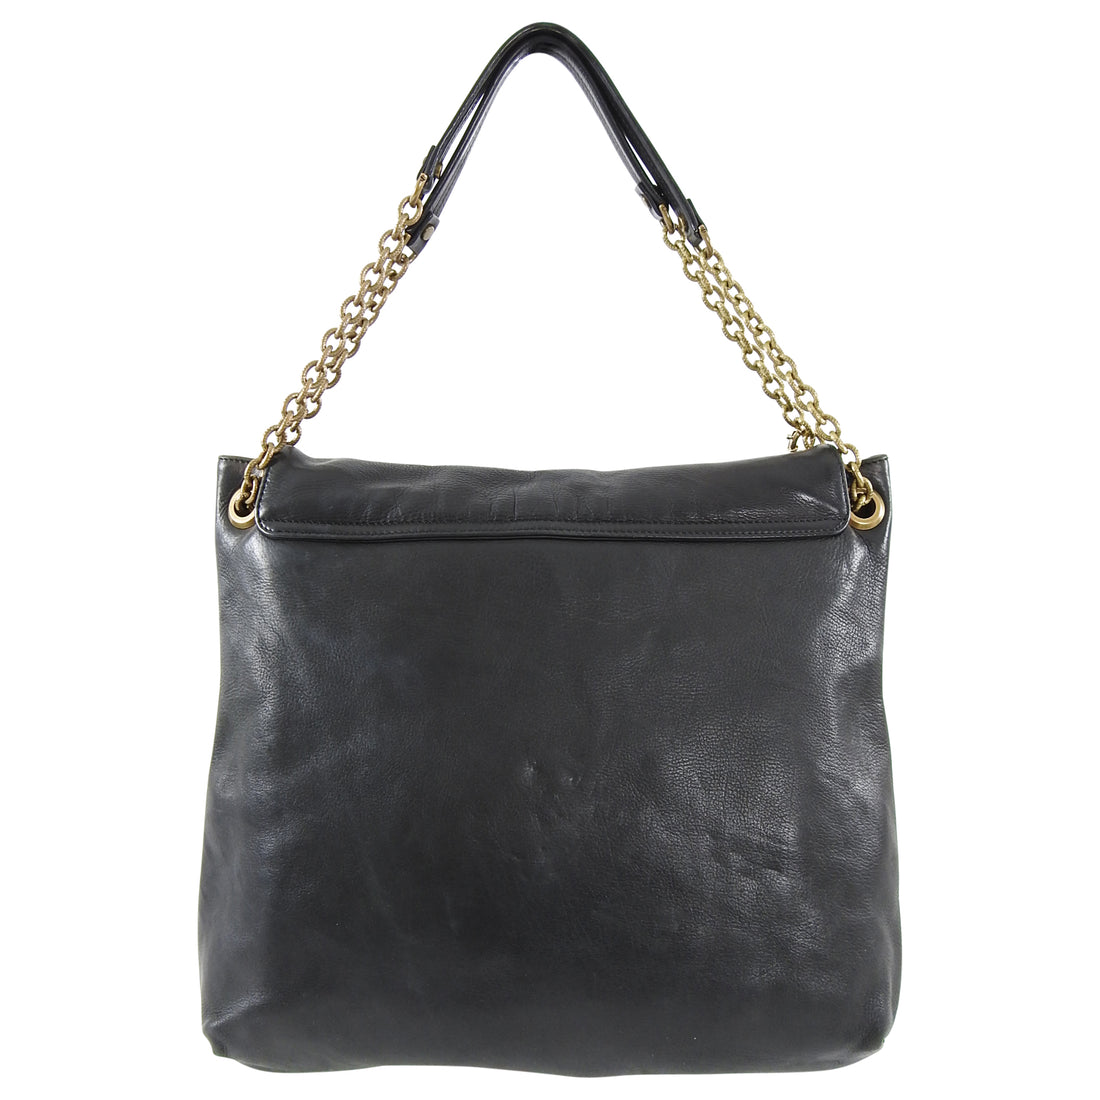 Lanvin Large Black Happy Bag with Chain Strap